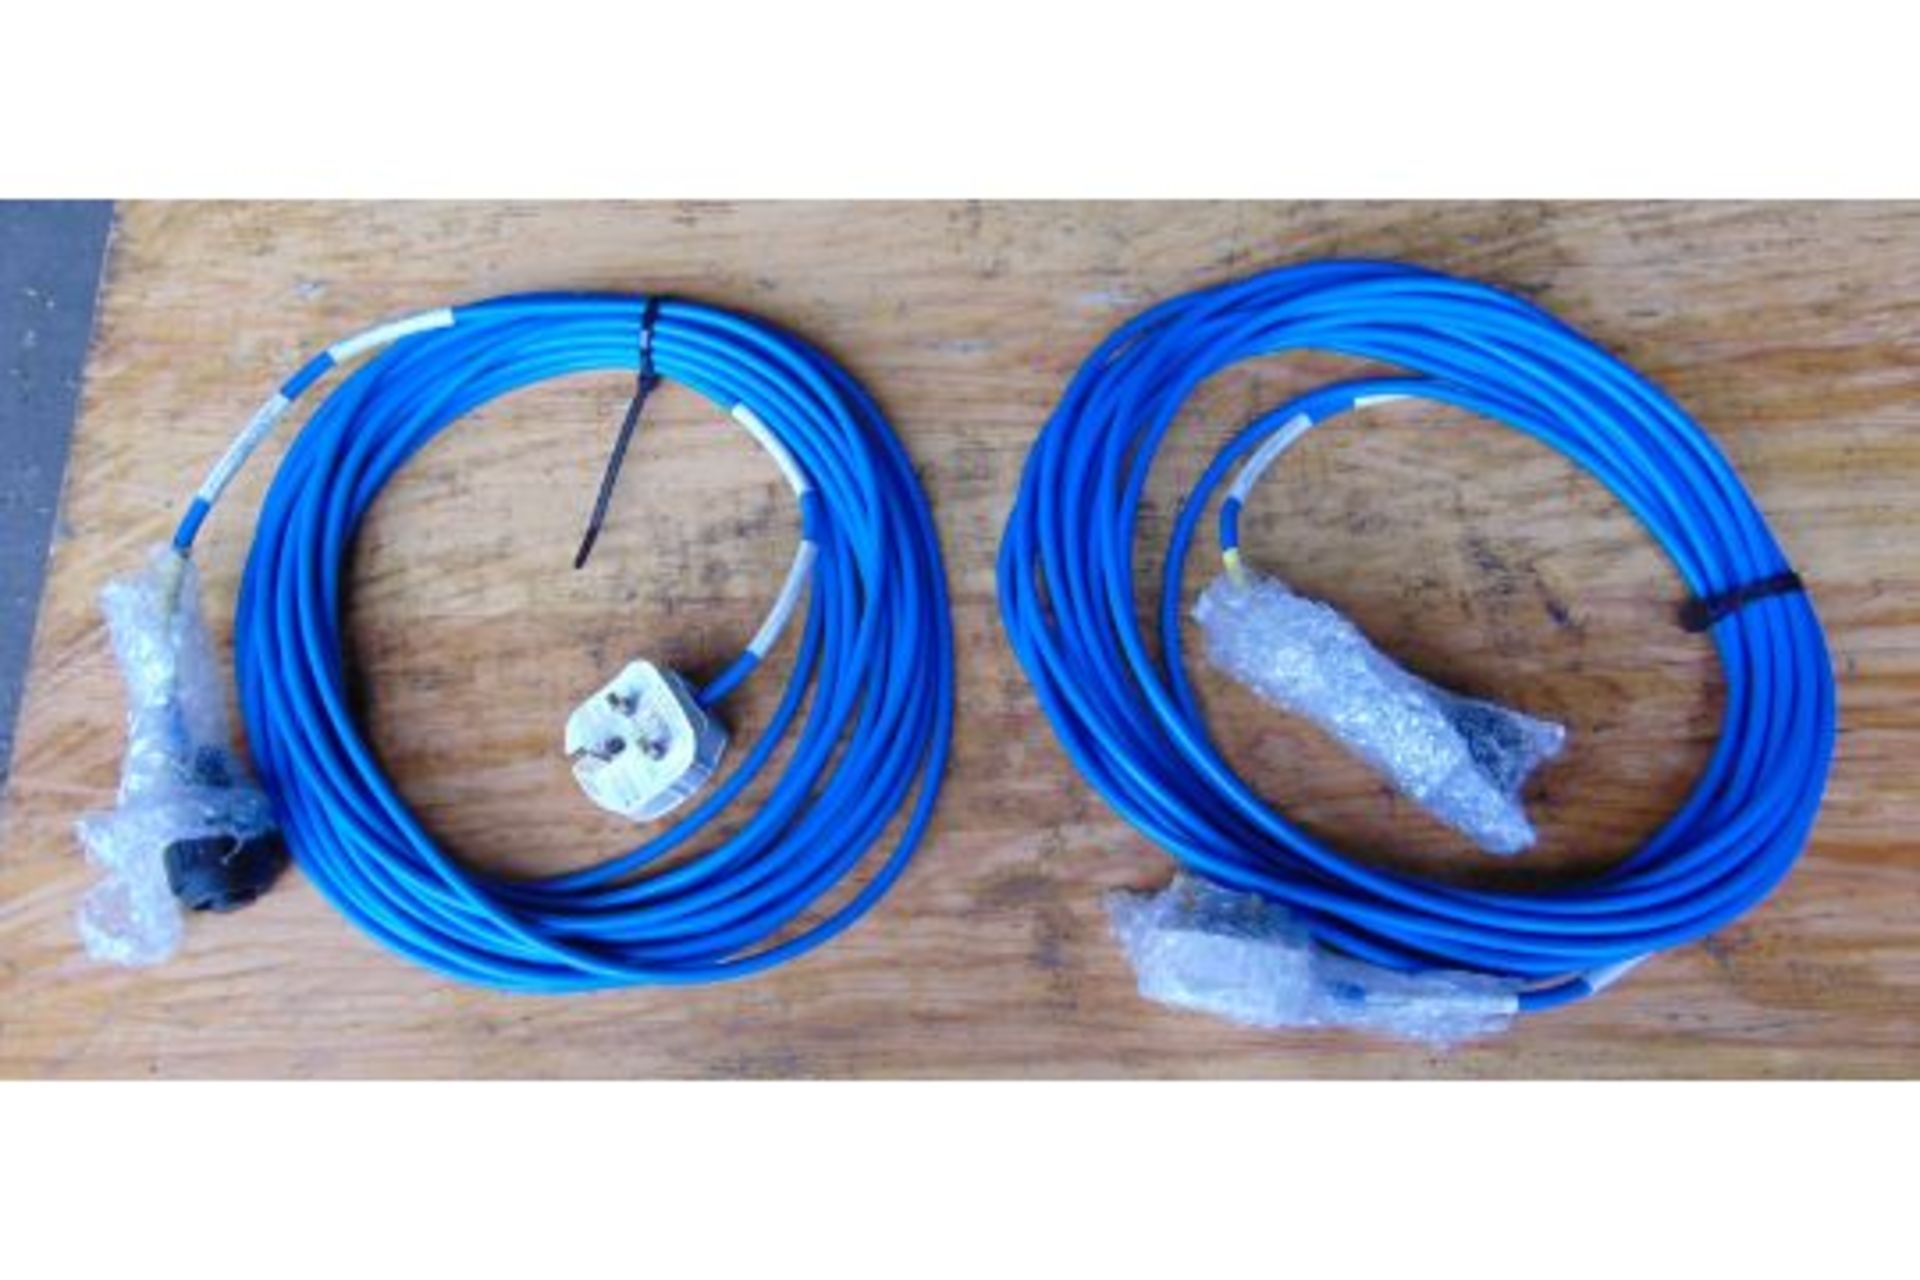 2 x Extension Power Cables.